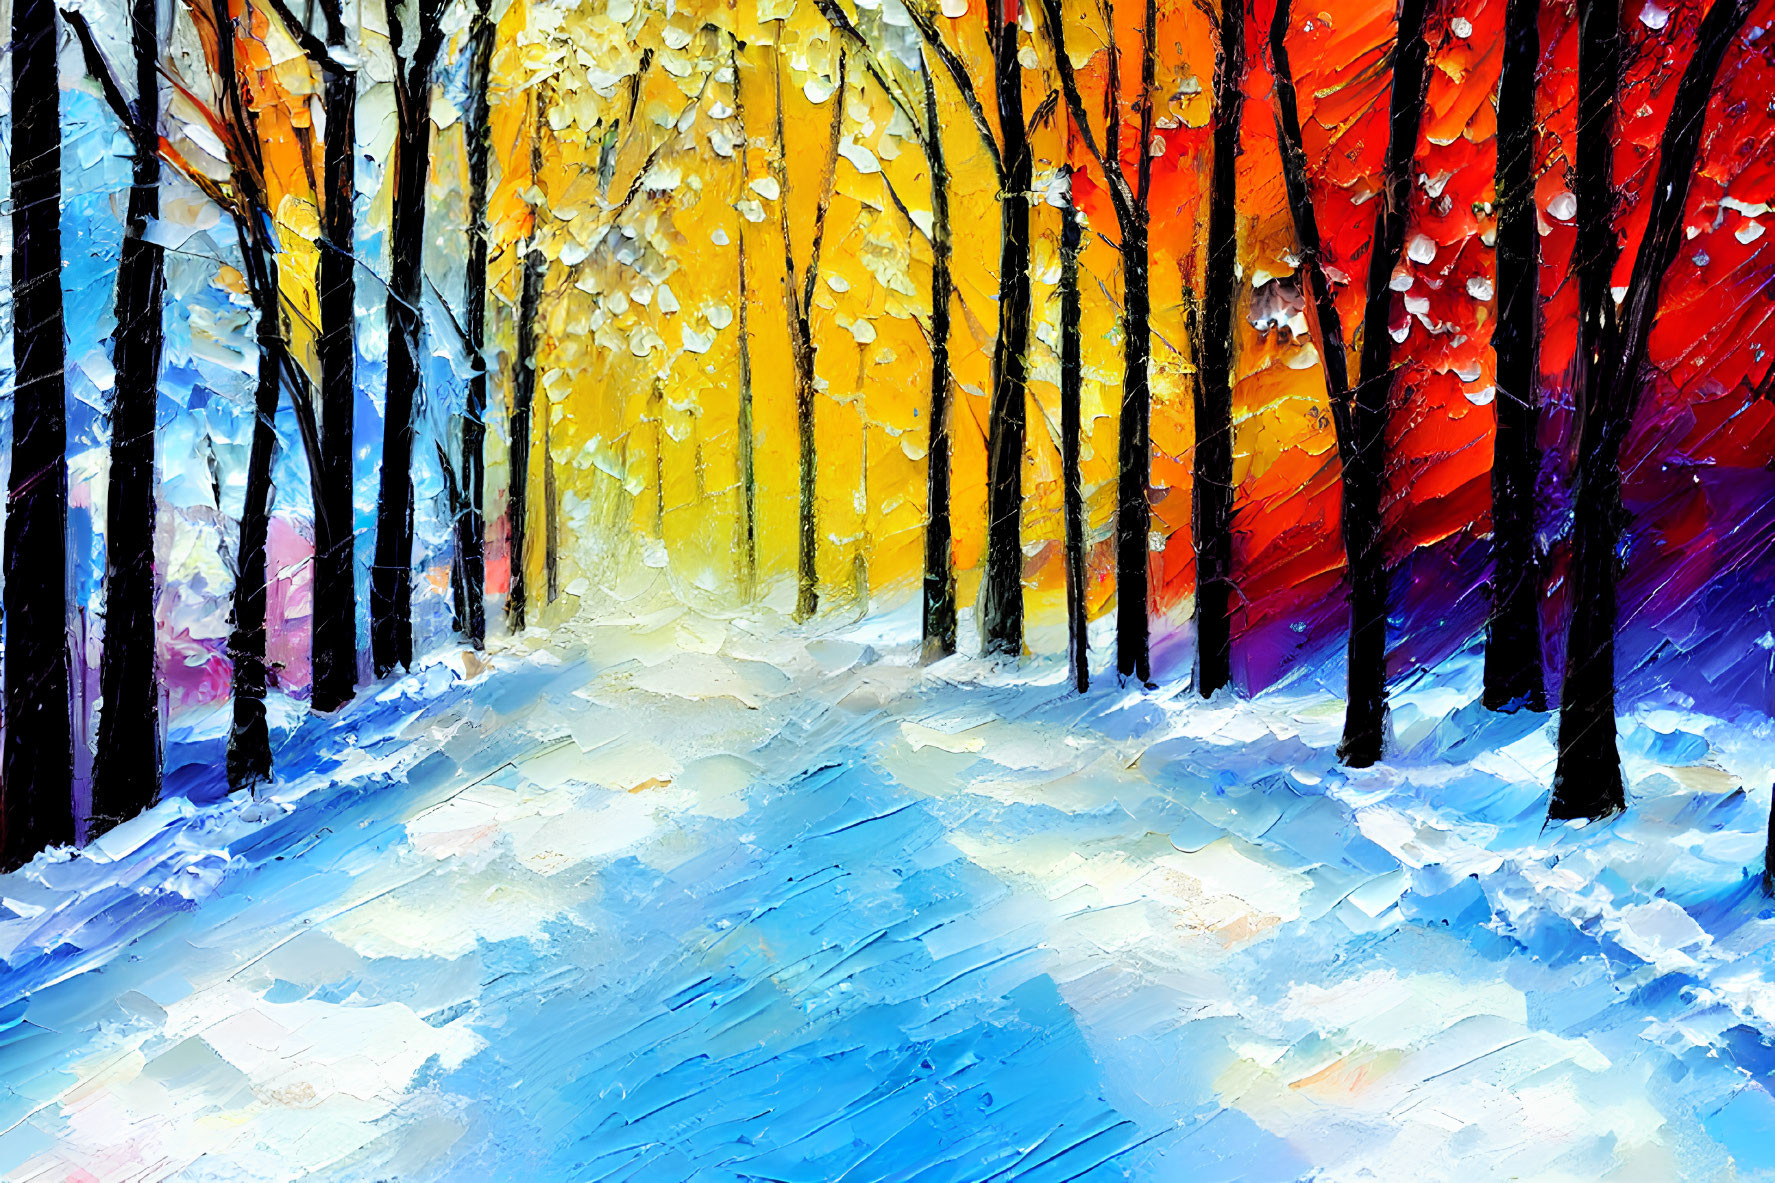 Vibrant snowy path painting with colorful trees in transition